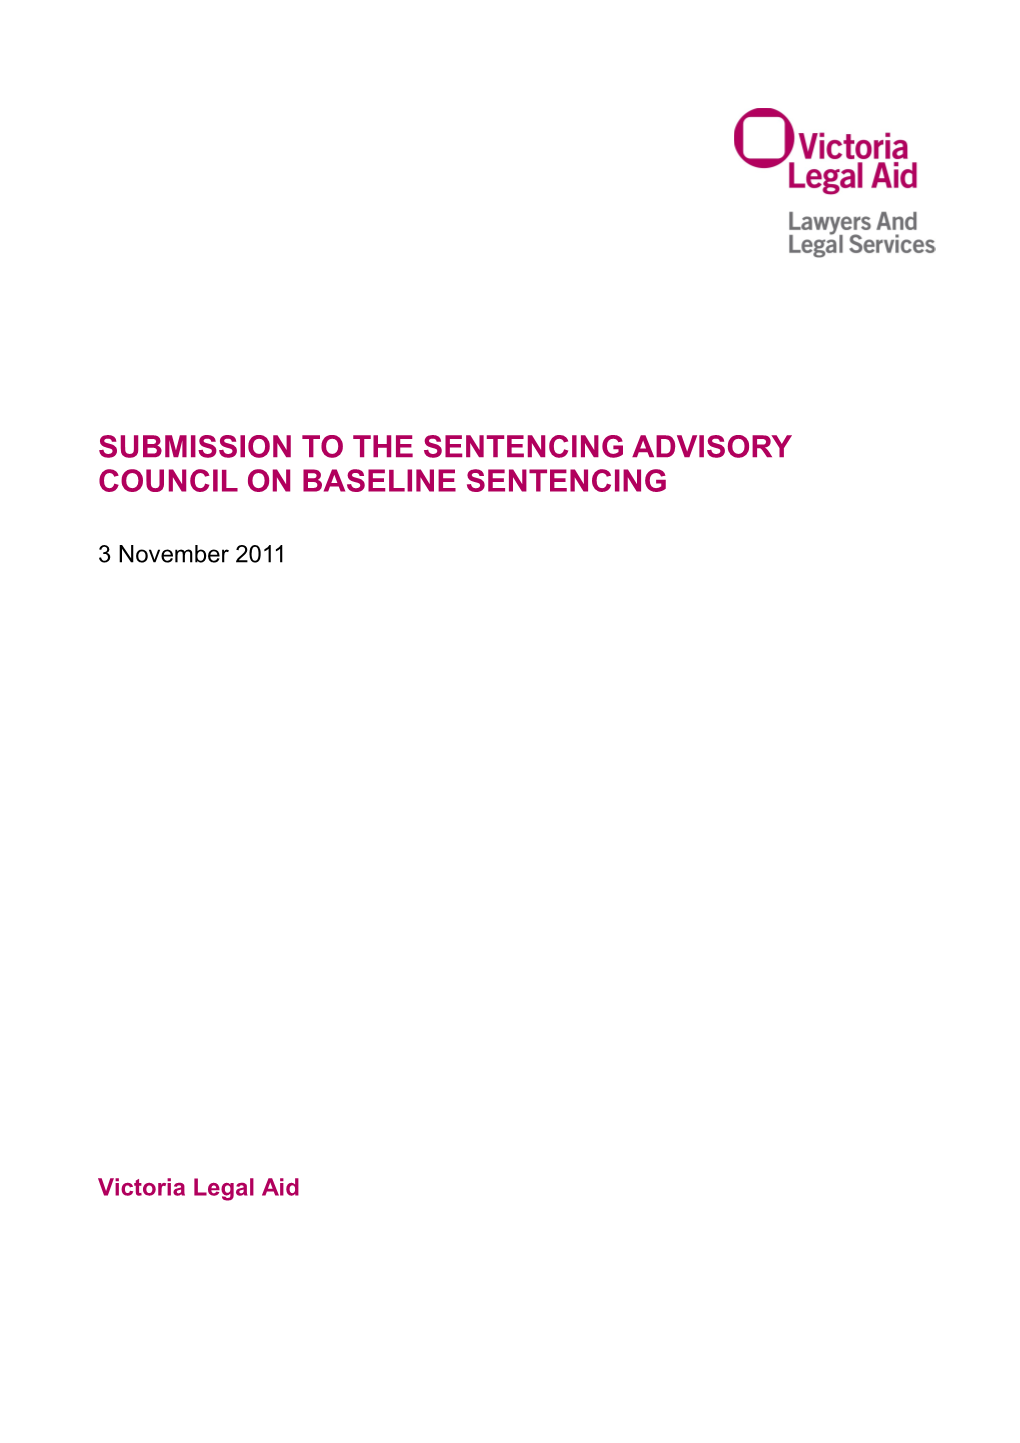 Submission to the Sentencing Advisory Council on Baseline Sentencing